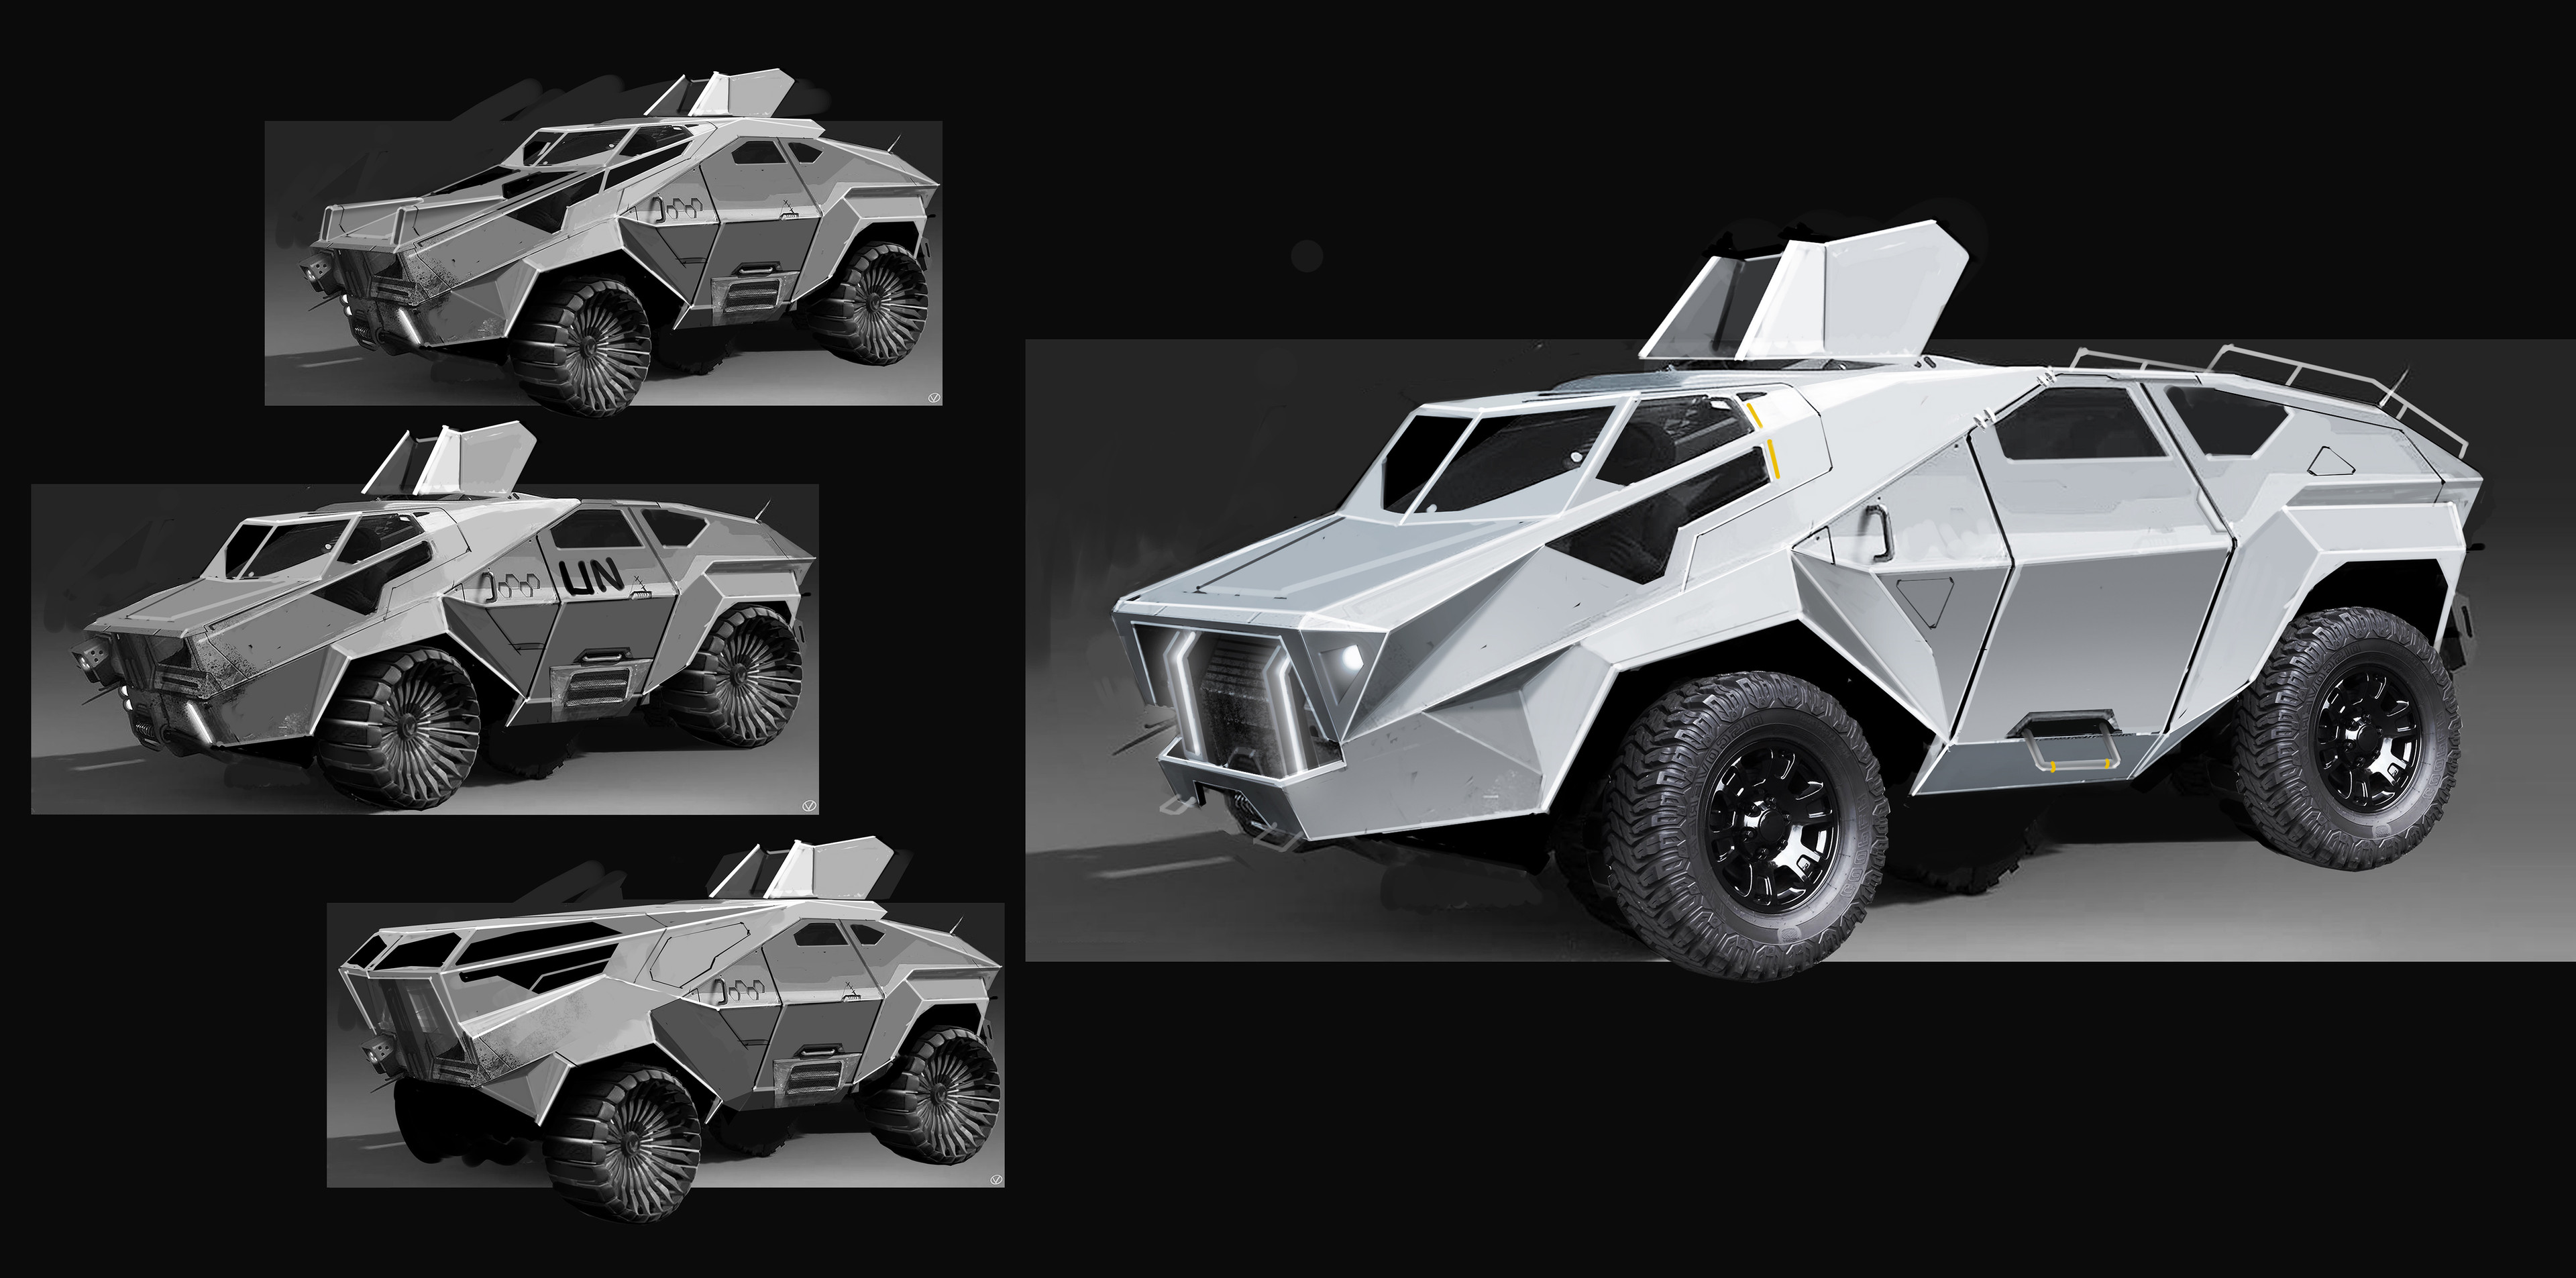 Vehicle design for the level "Dig"